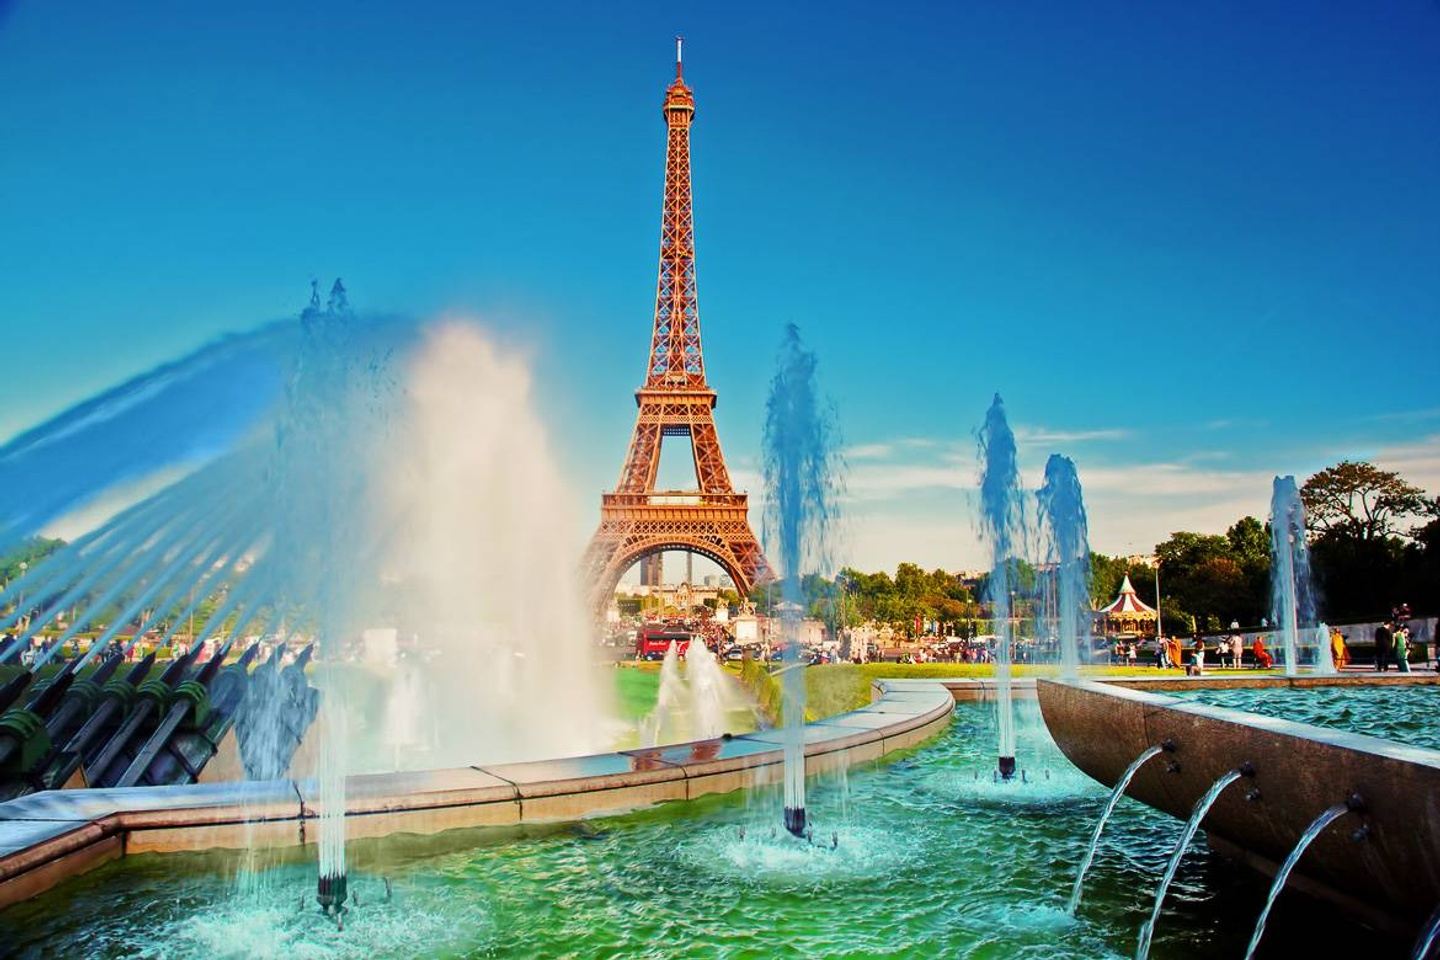 2024 Summer Games Packages in Paris, France